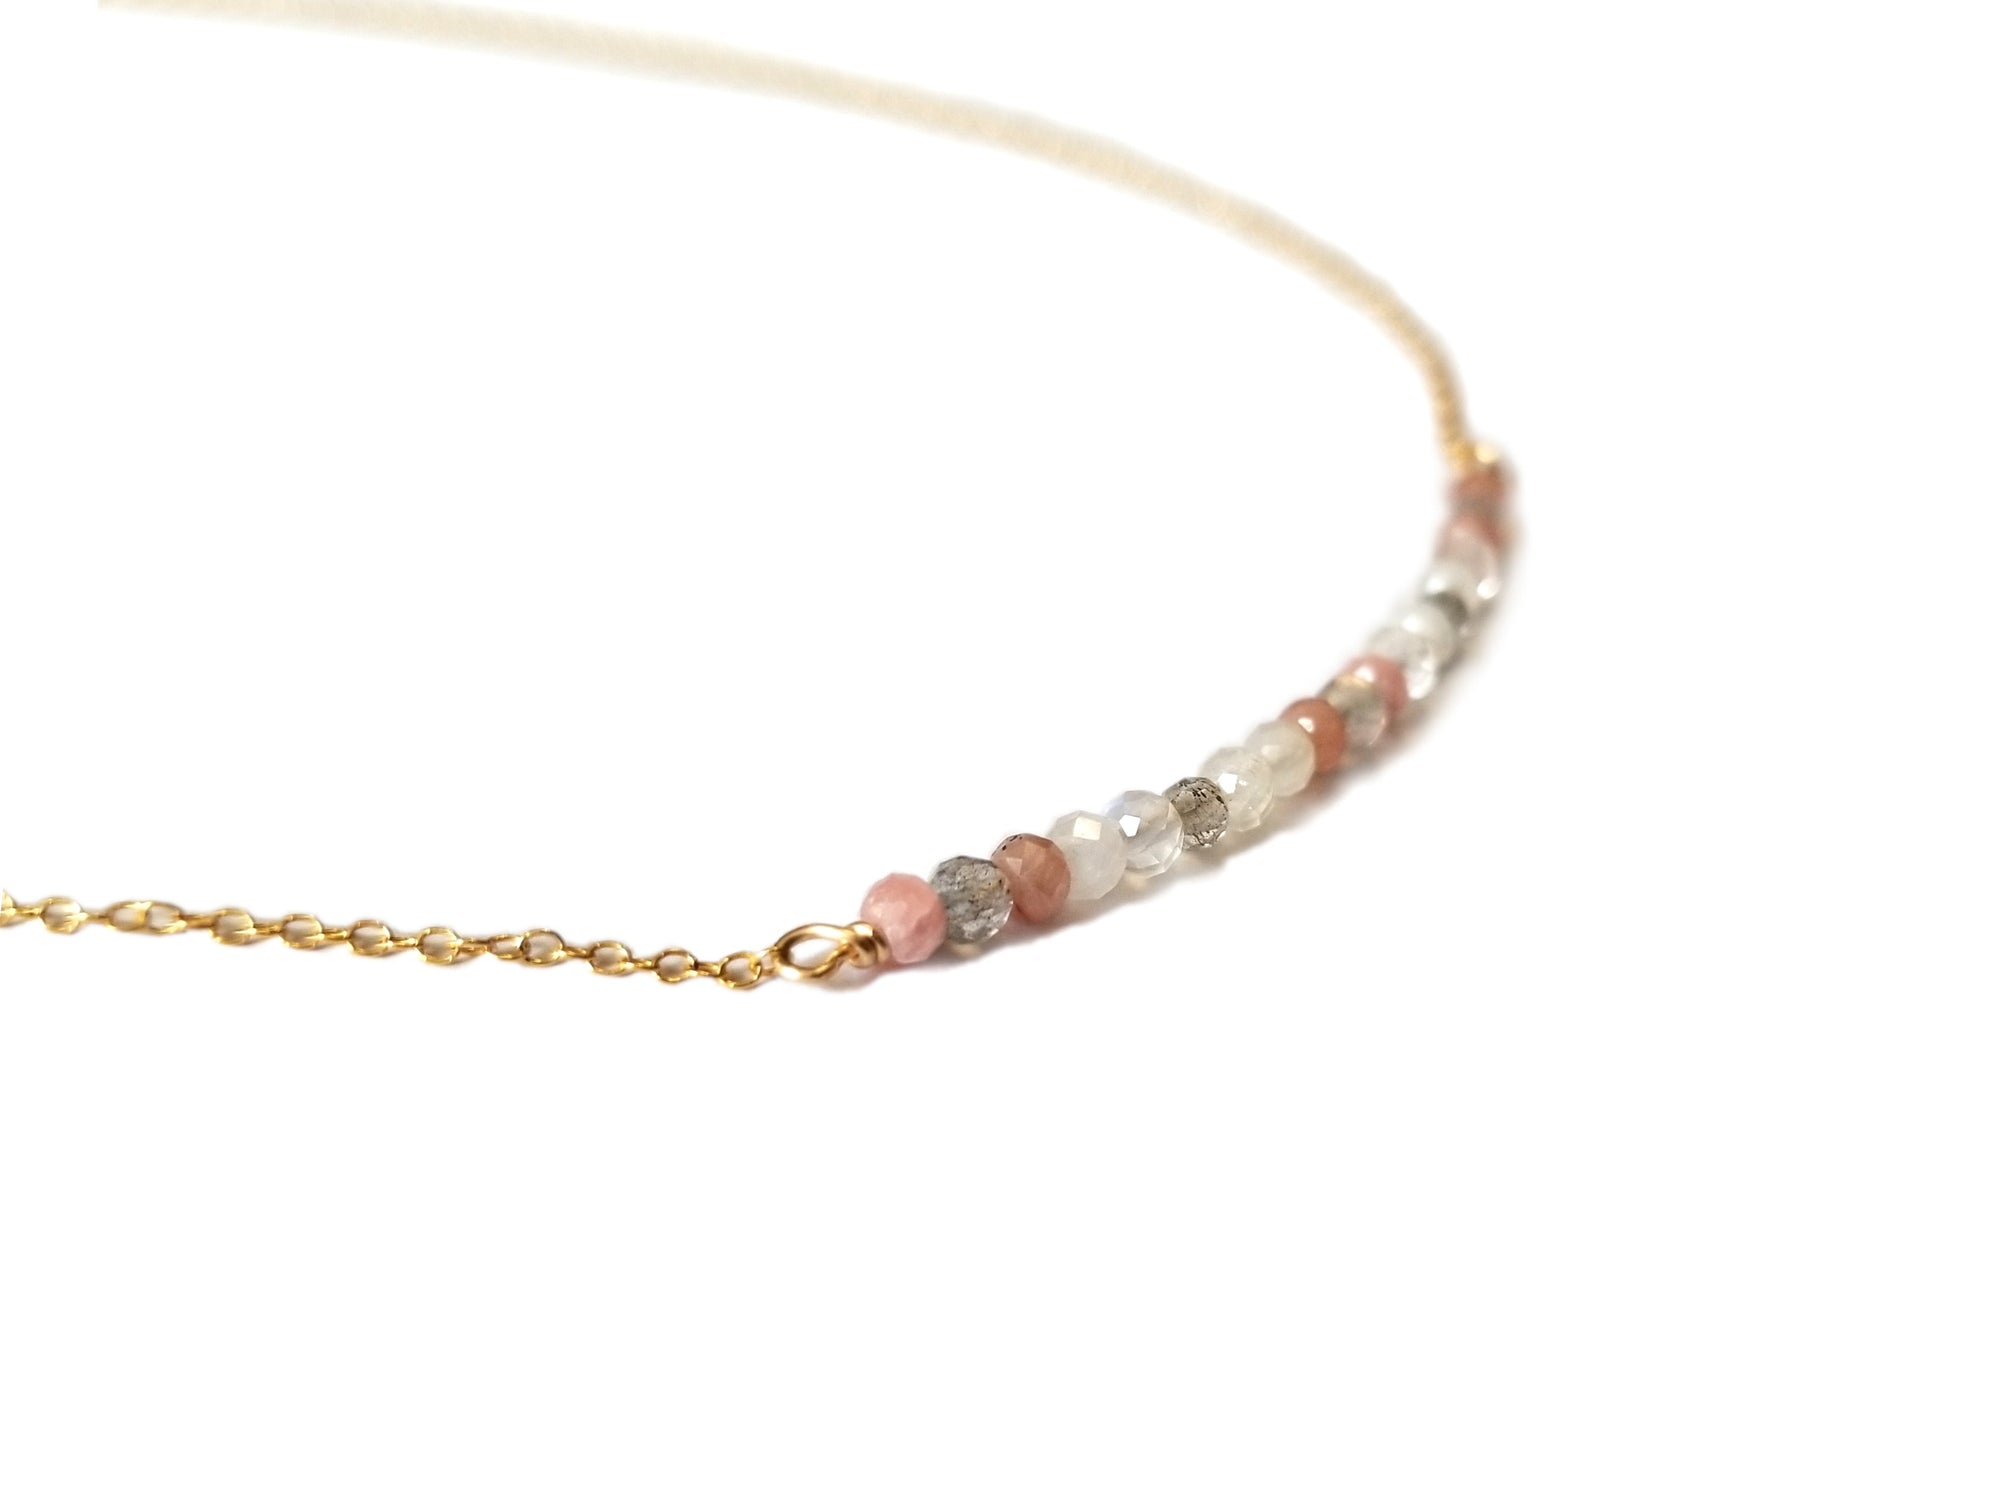  Pink and White Moonstone Goddess Gold Necklace